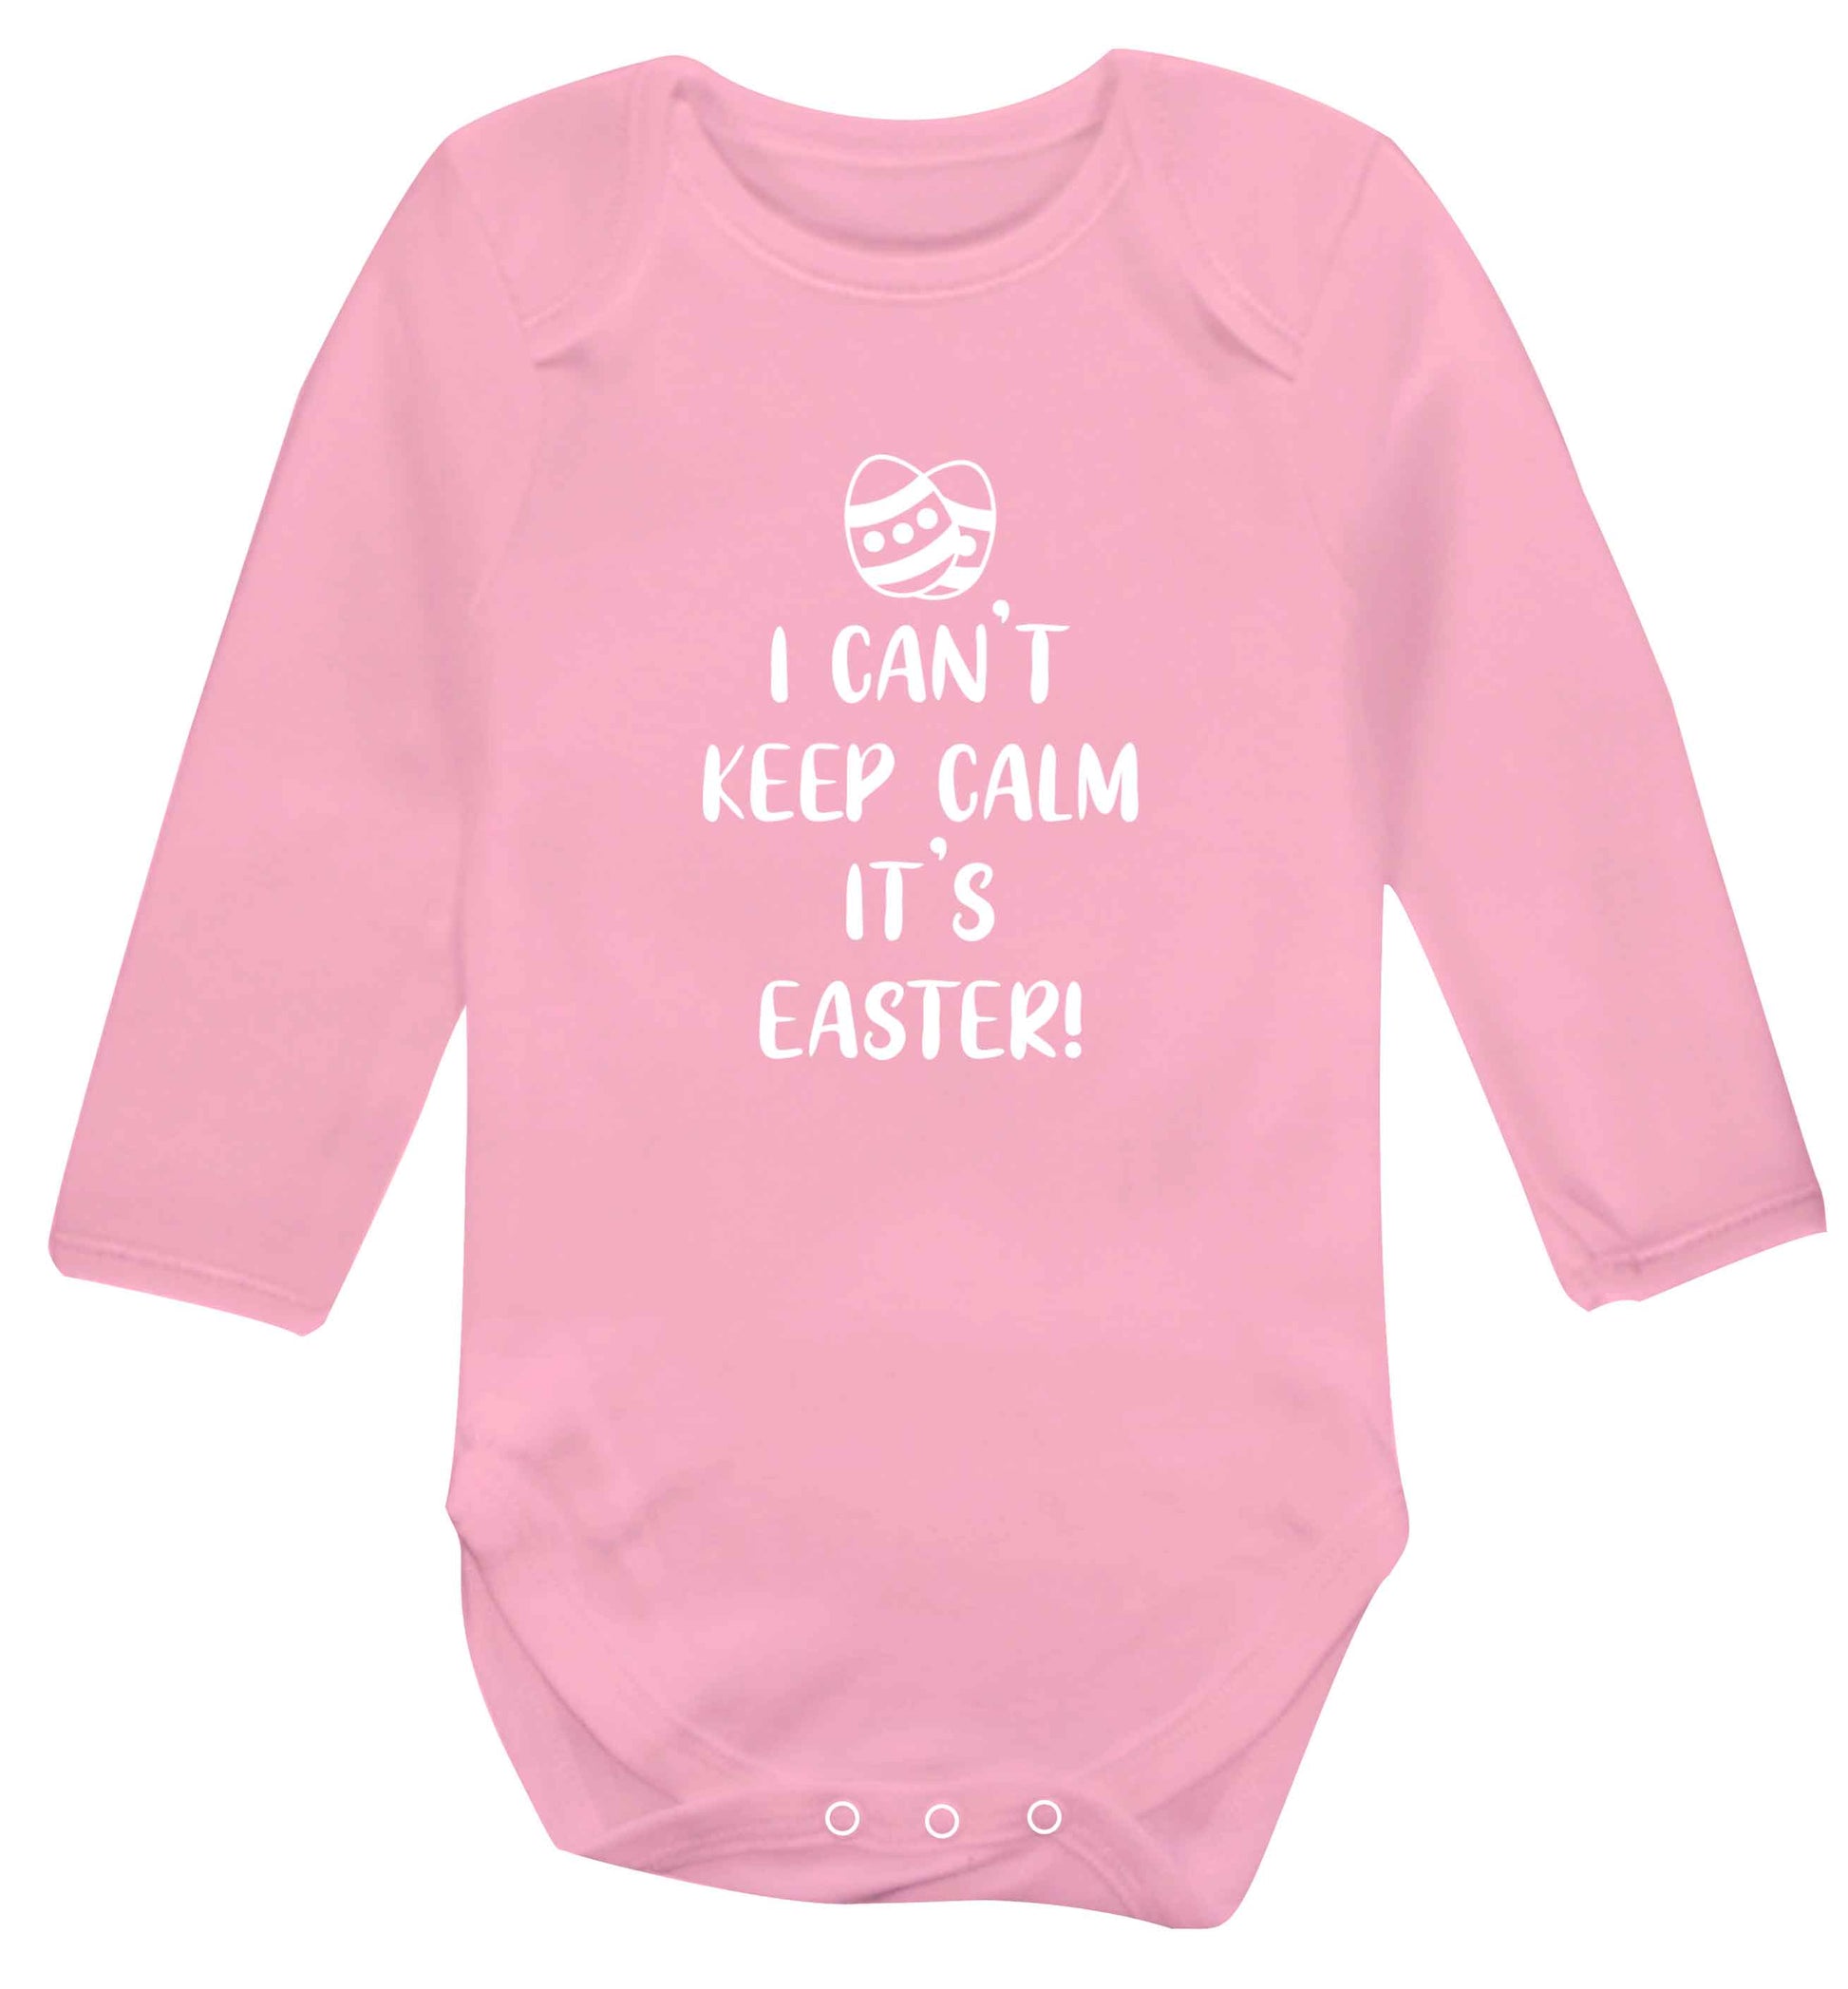 I can't keep calm it's Easter baby vest long sleeved pale pink 6-12 months